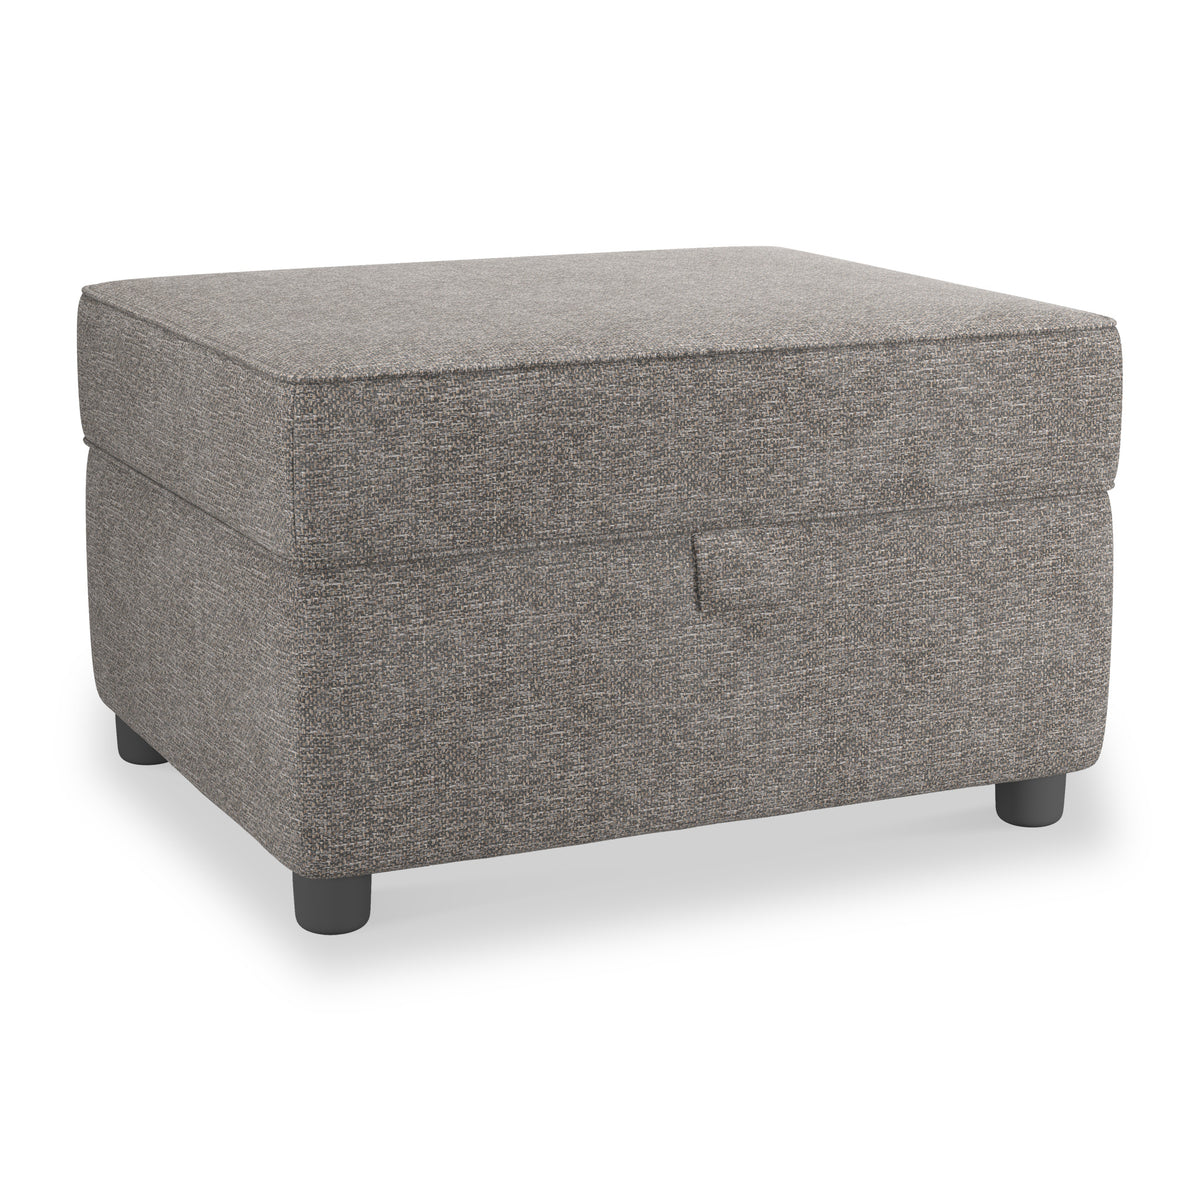 Harry Brown Small Storage Footstool from Roseland Furniture